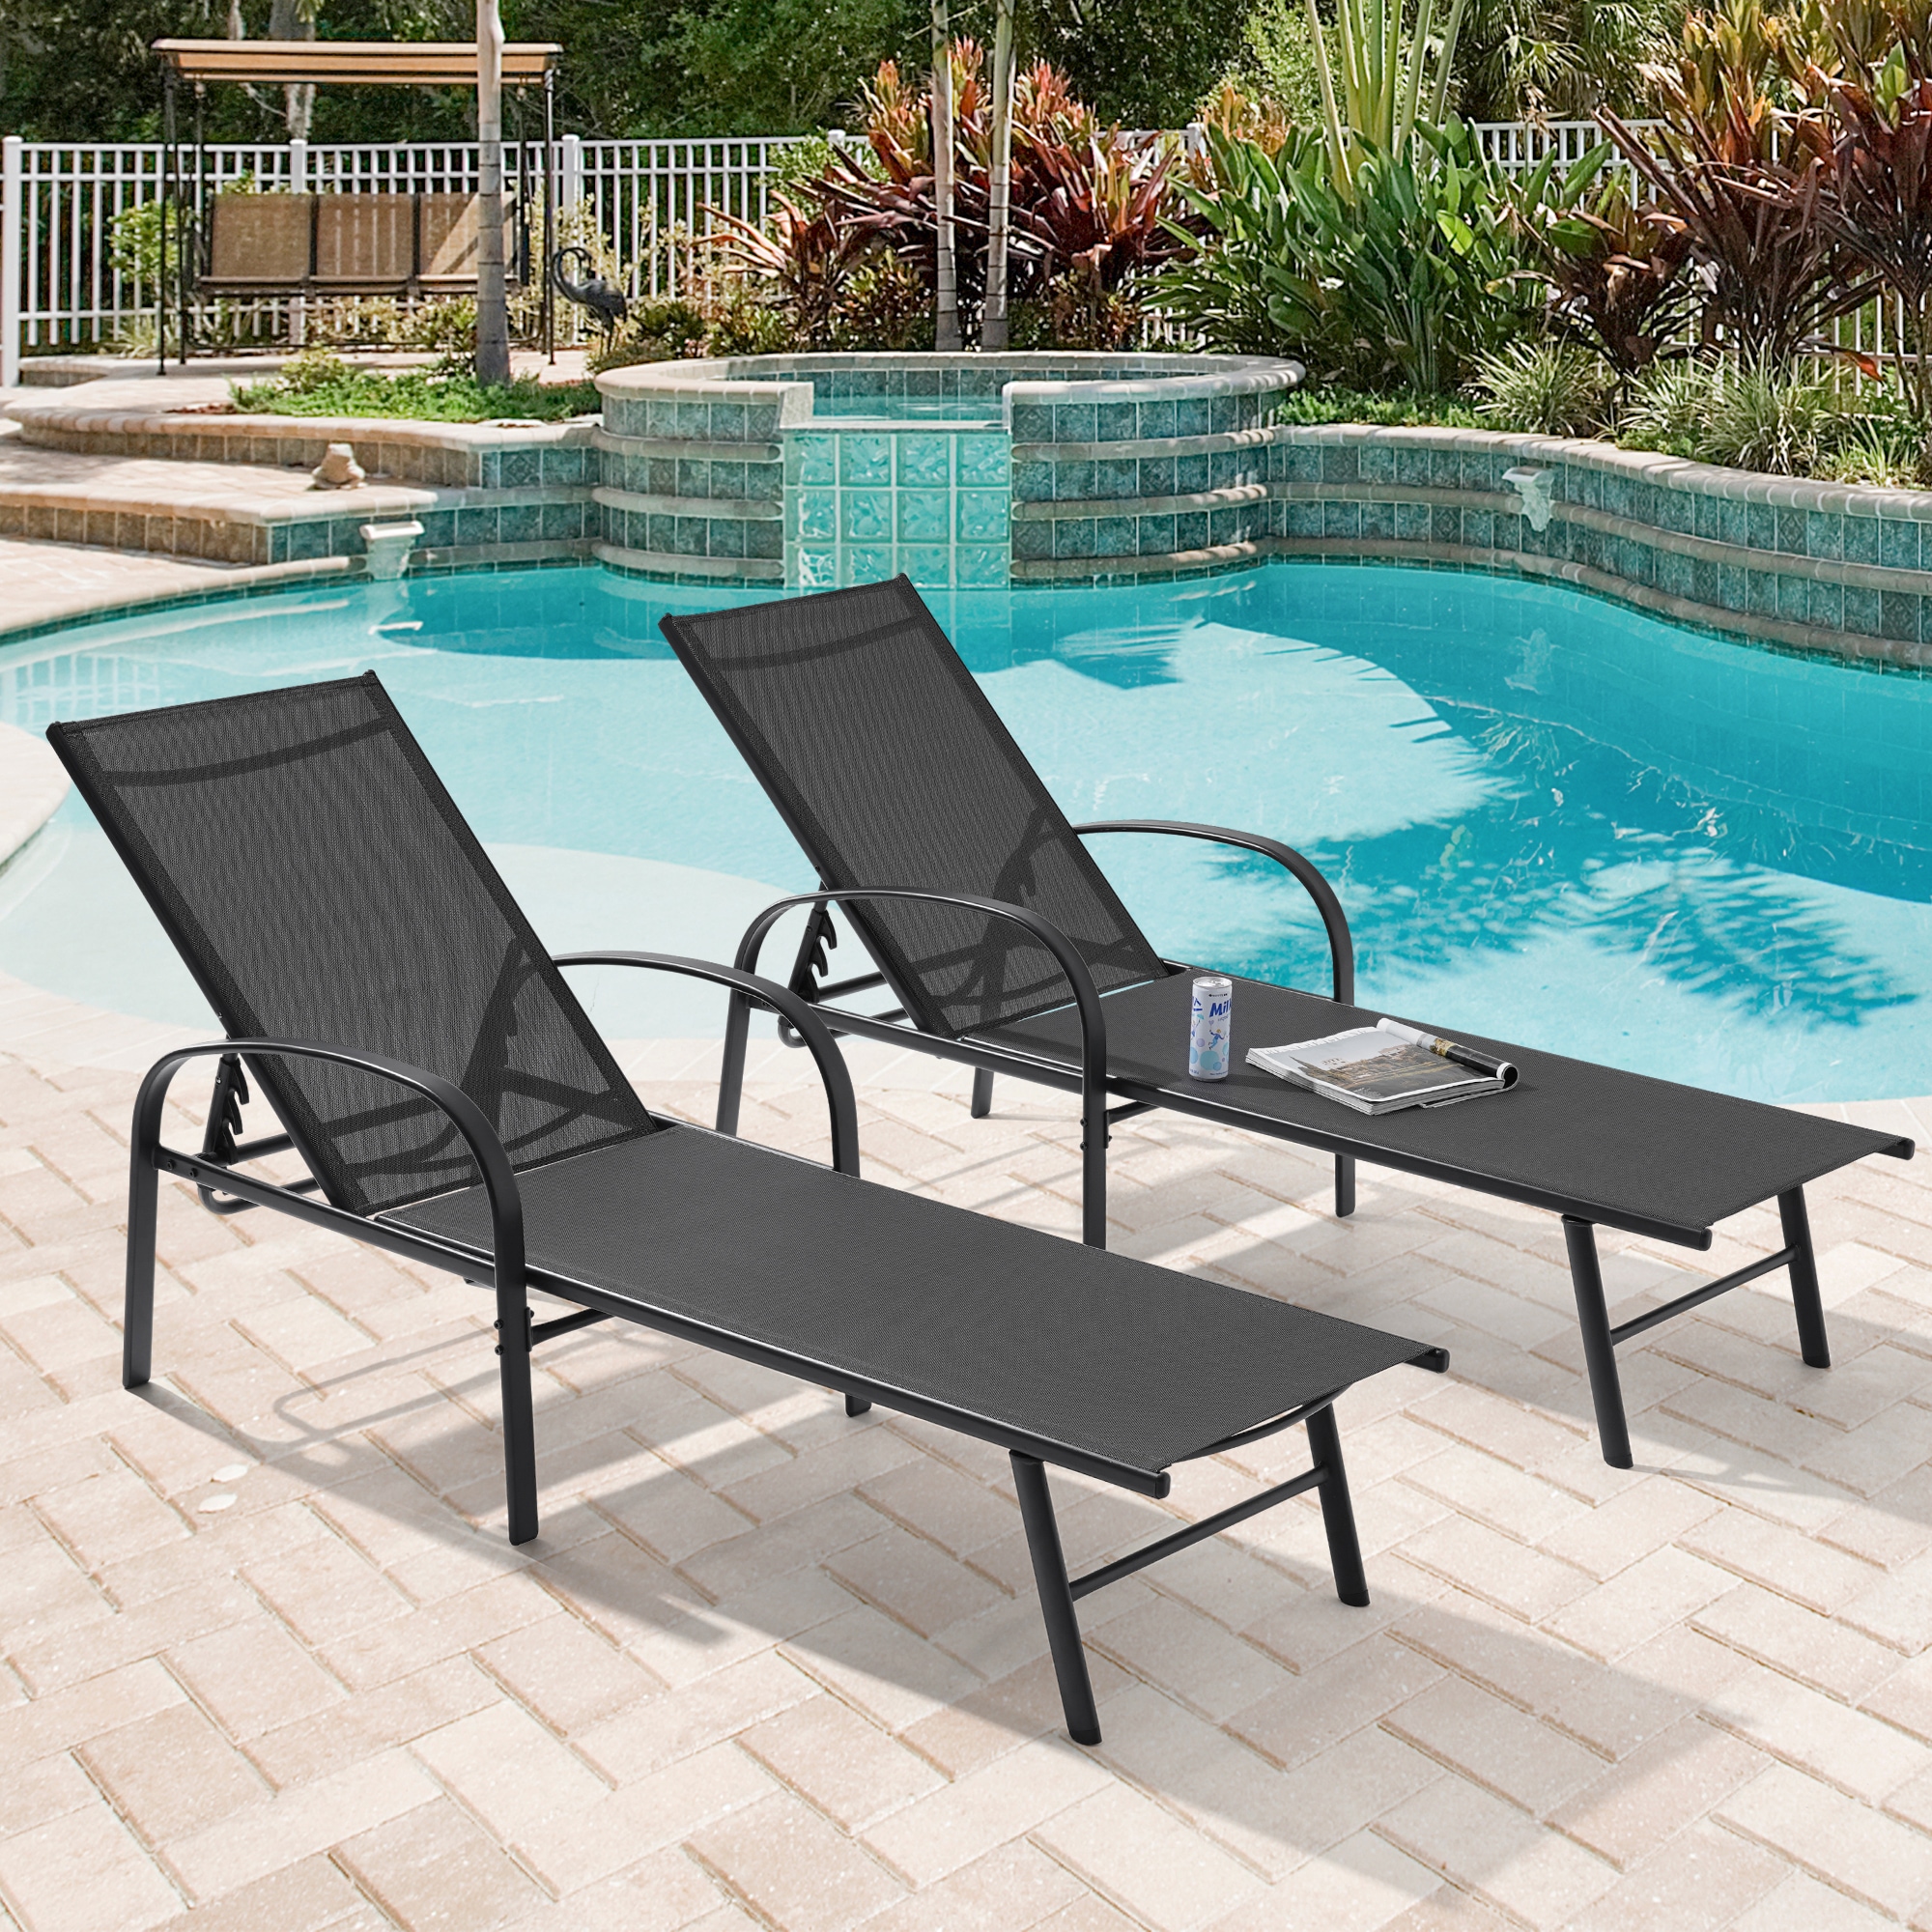 Acegoses Patio Lounge Chair Set Of 2 Frame Stationary Chaise Lounge Chair(S)  With Black Sling Seat In The Patio Chairs Department At Lowes.Com